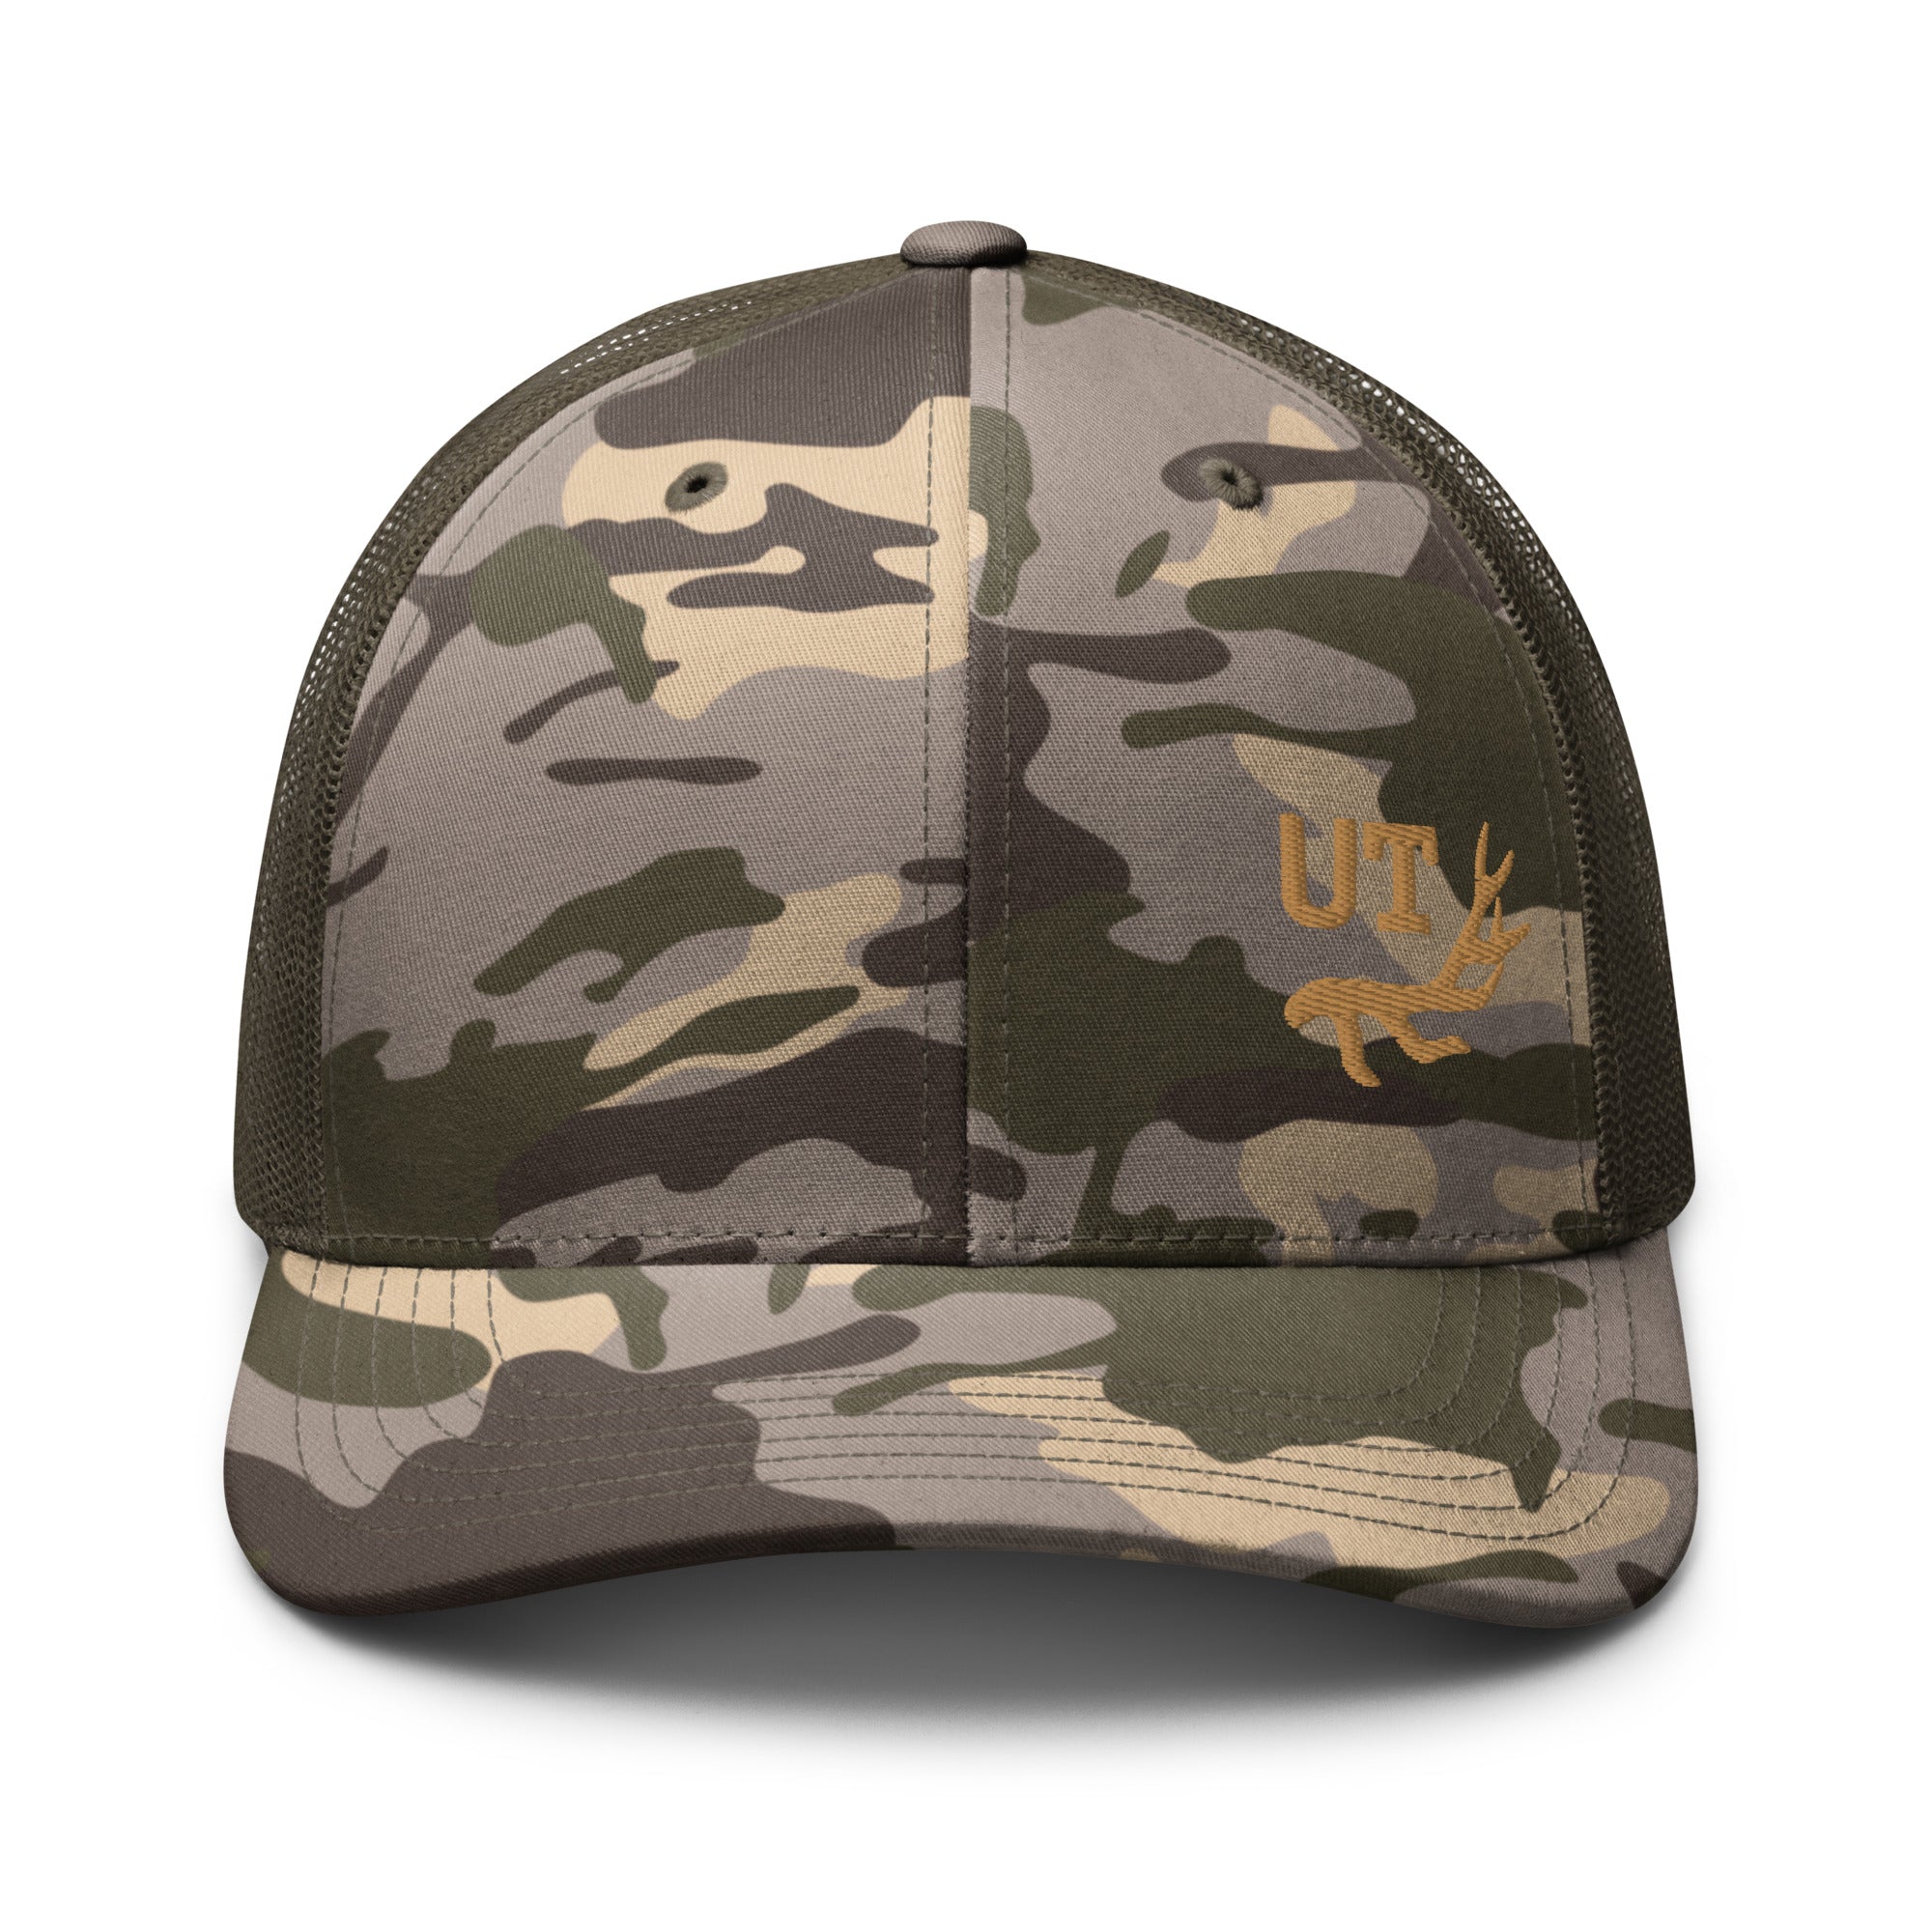 camouflage-trucker-hat-camo-olive-front-655e67ab0fc52.jpg